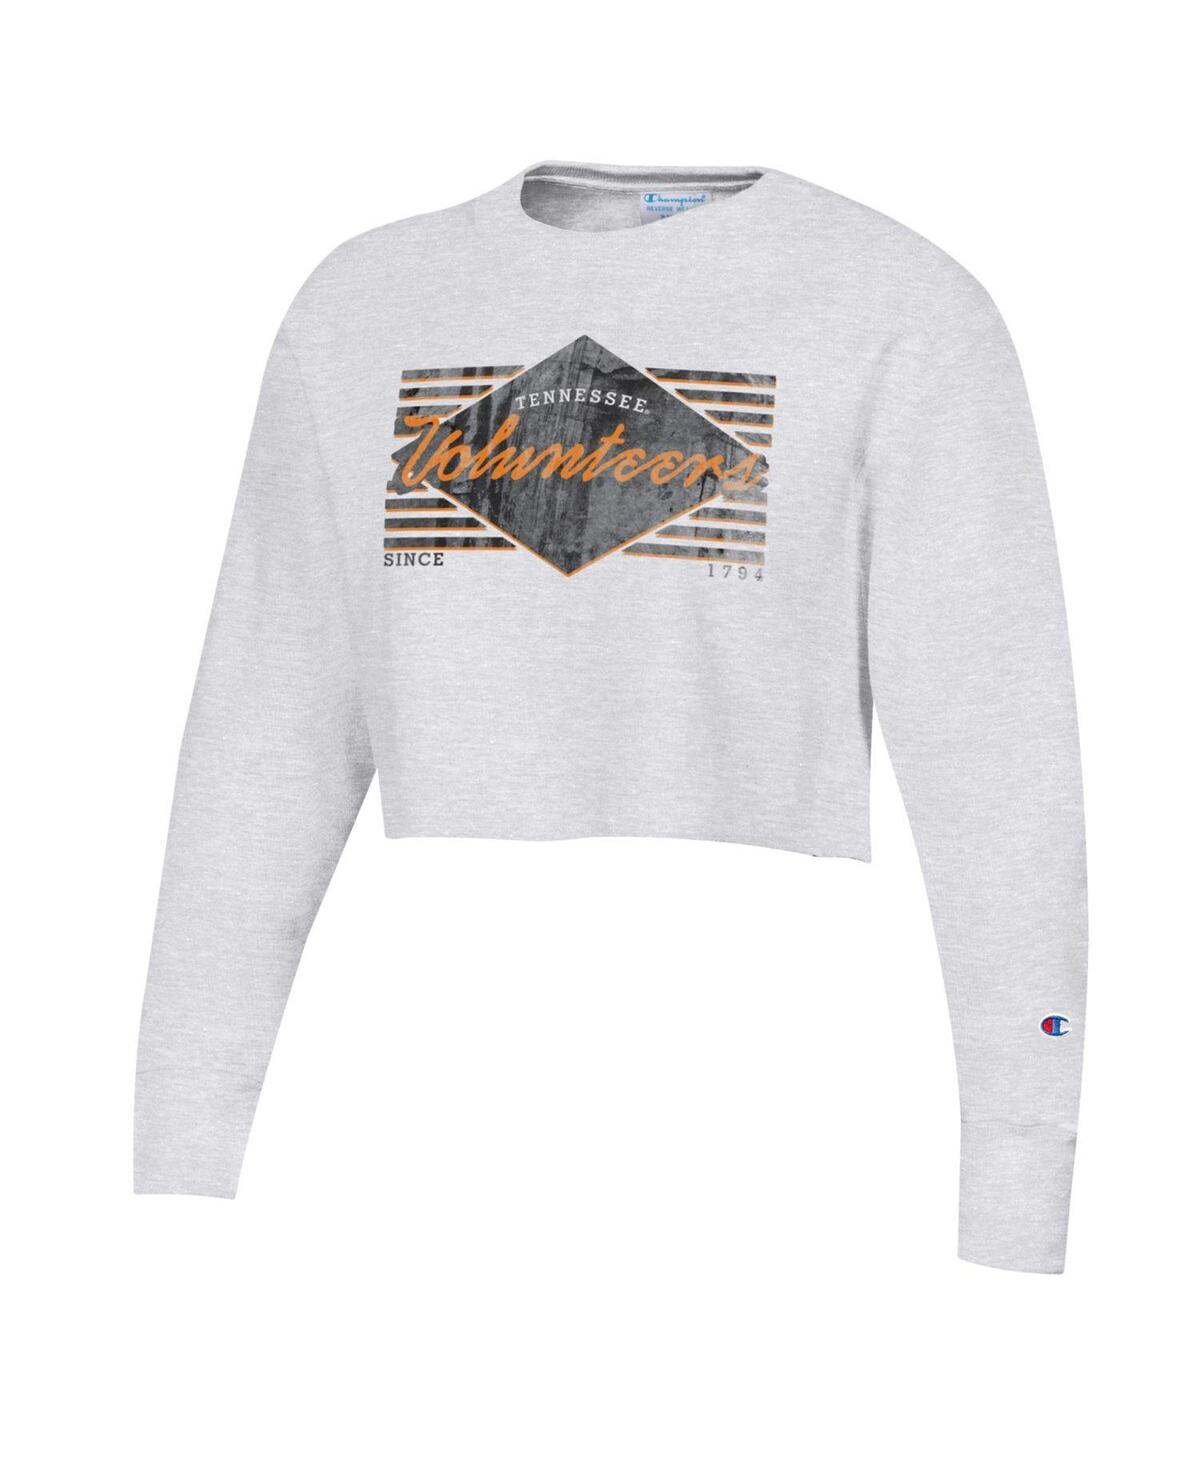 Shop Champion Women's  Heather Gray Distressed Tennessee Volunteers Reverse Weaveâ Cropped Pullover Sweats